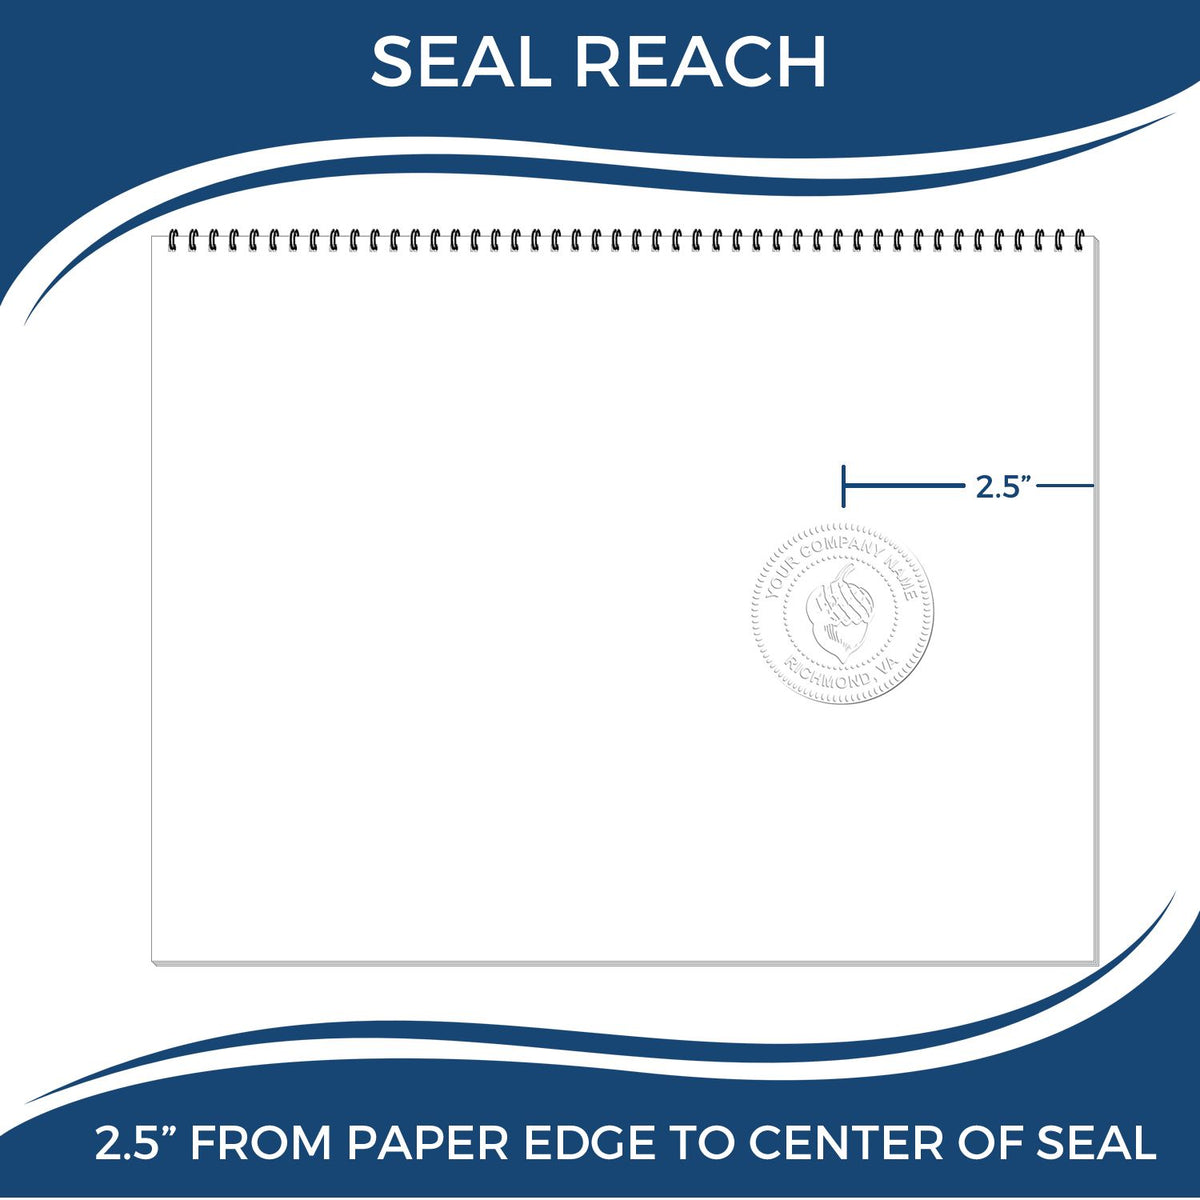 An infographic showing the seal reach which is represented by a ruler and a miniature seal image of the Heavy Duty Cast Iron Wyoming Architect Embosser